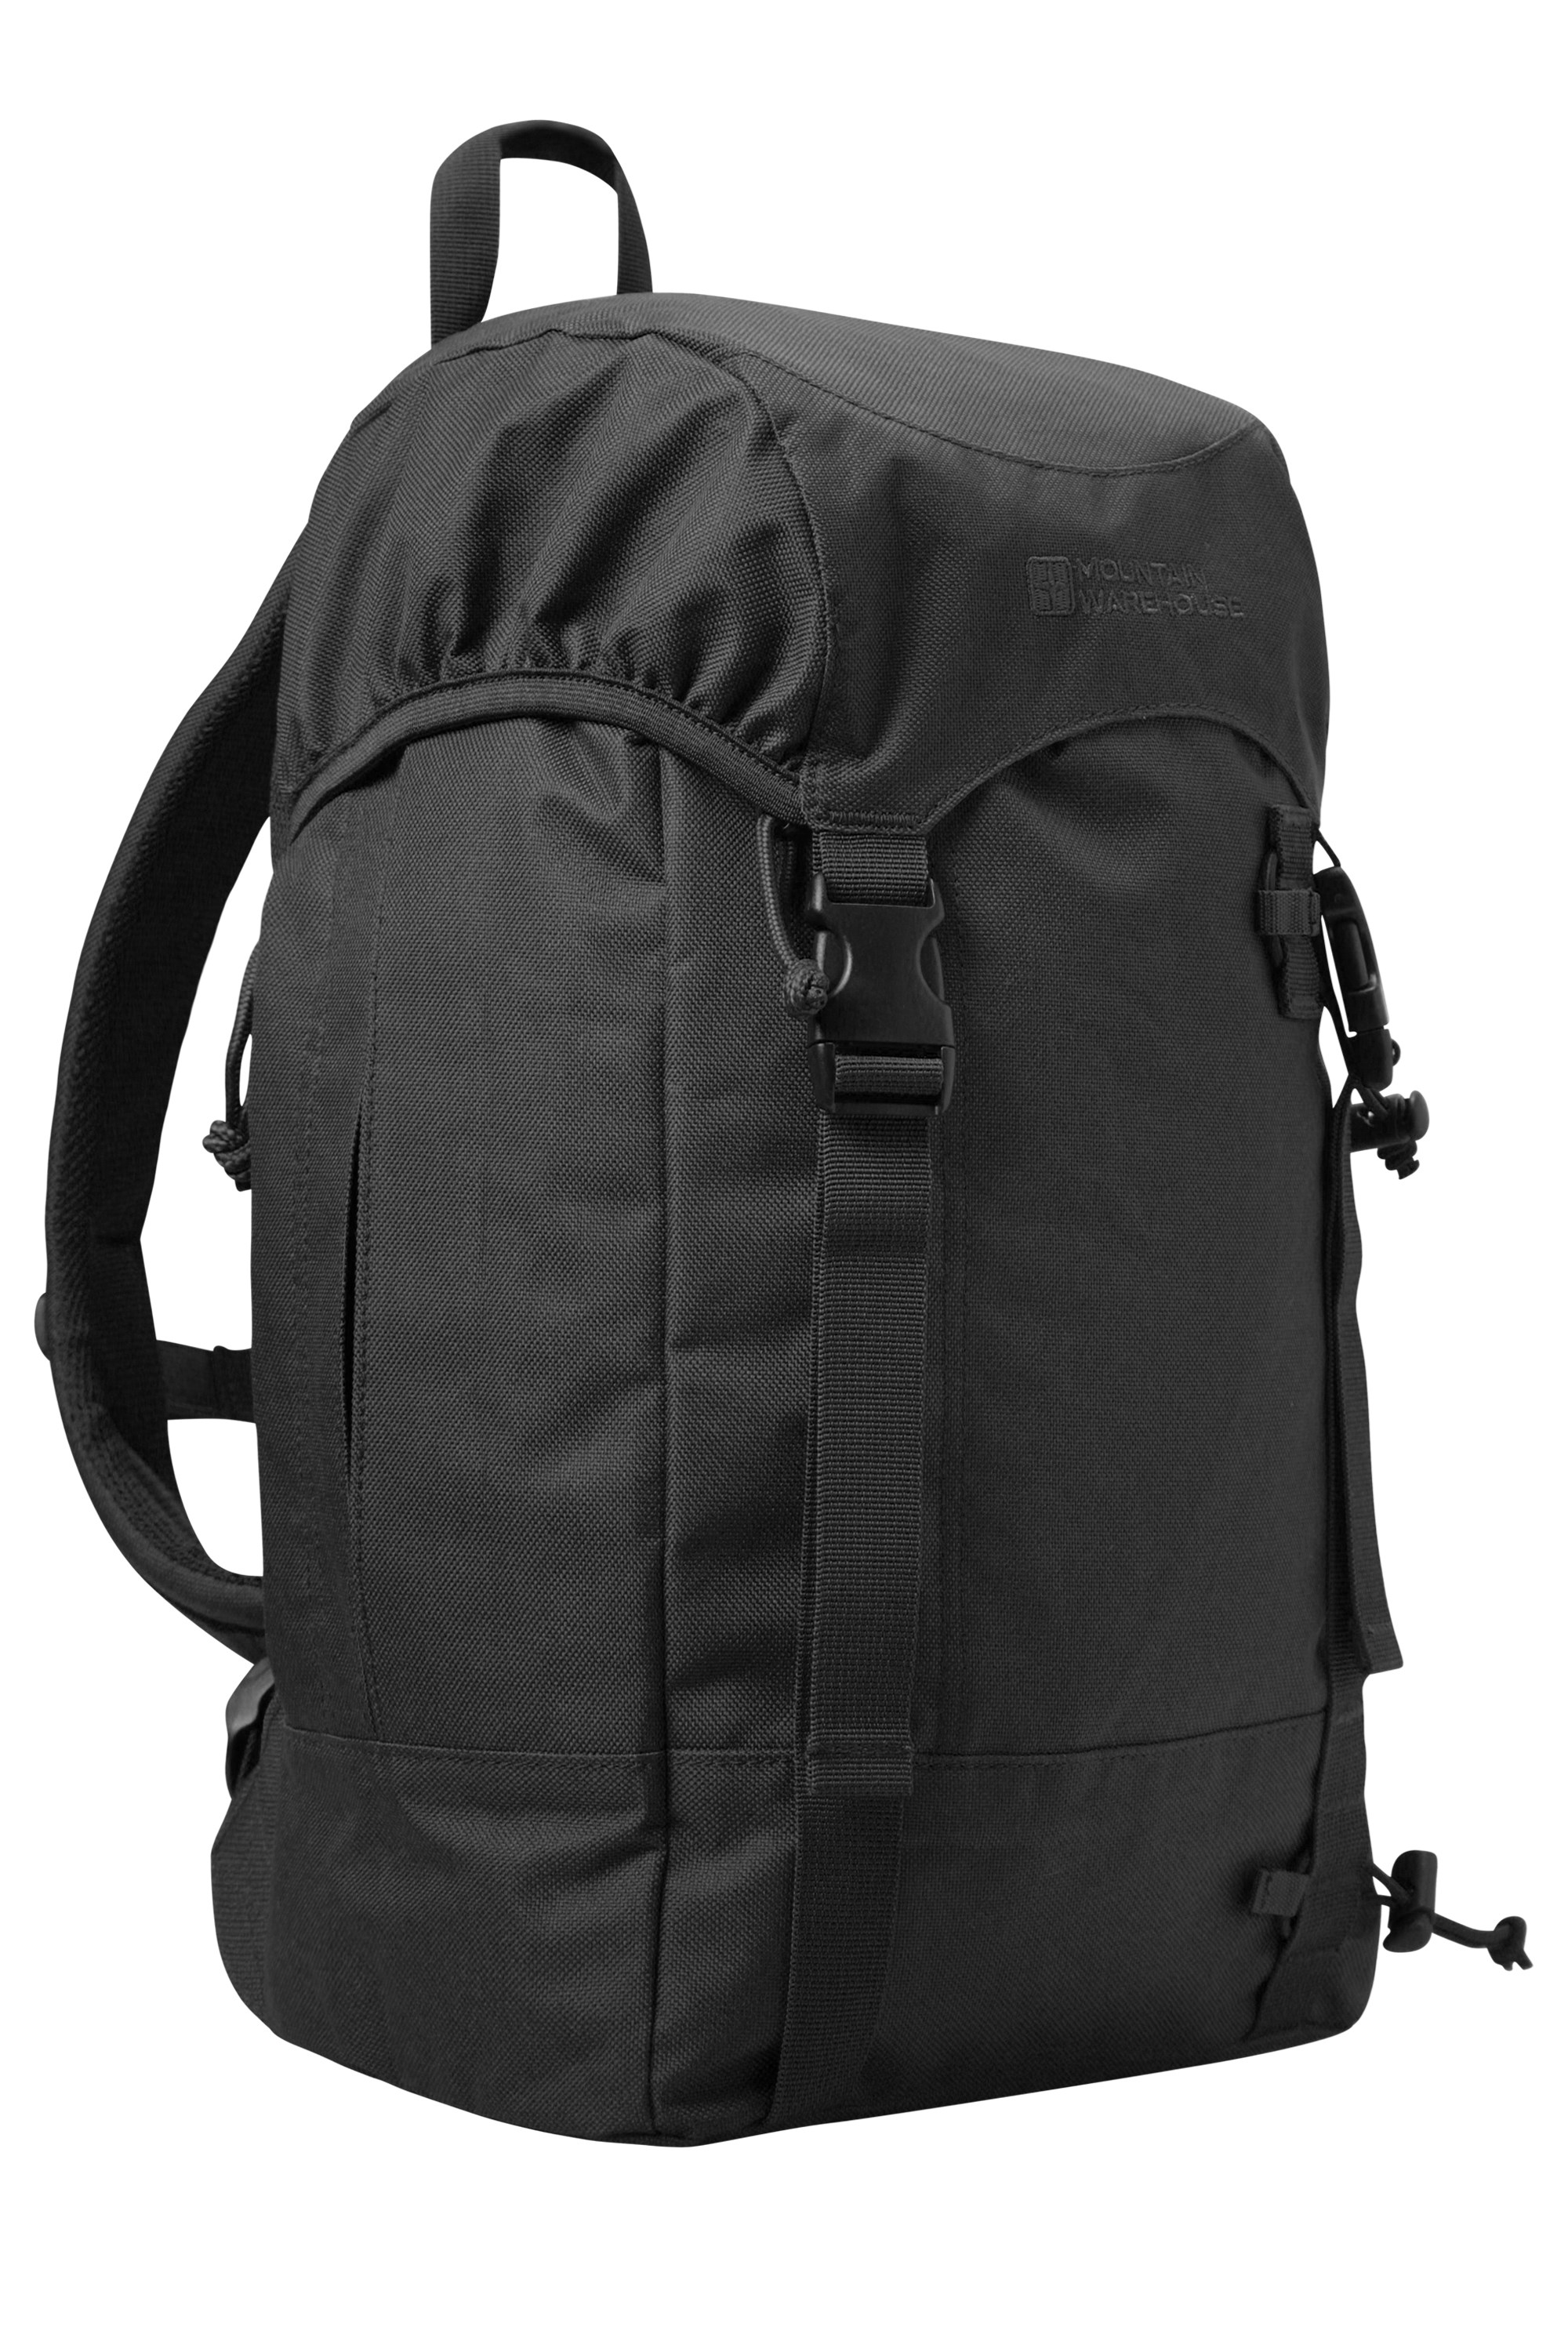 Drybag Backpack - 10L  Mountain Warehouse US